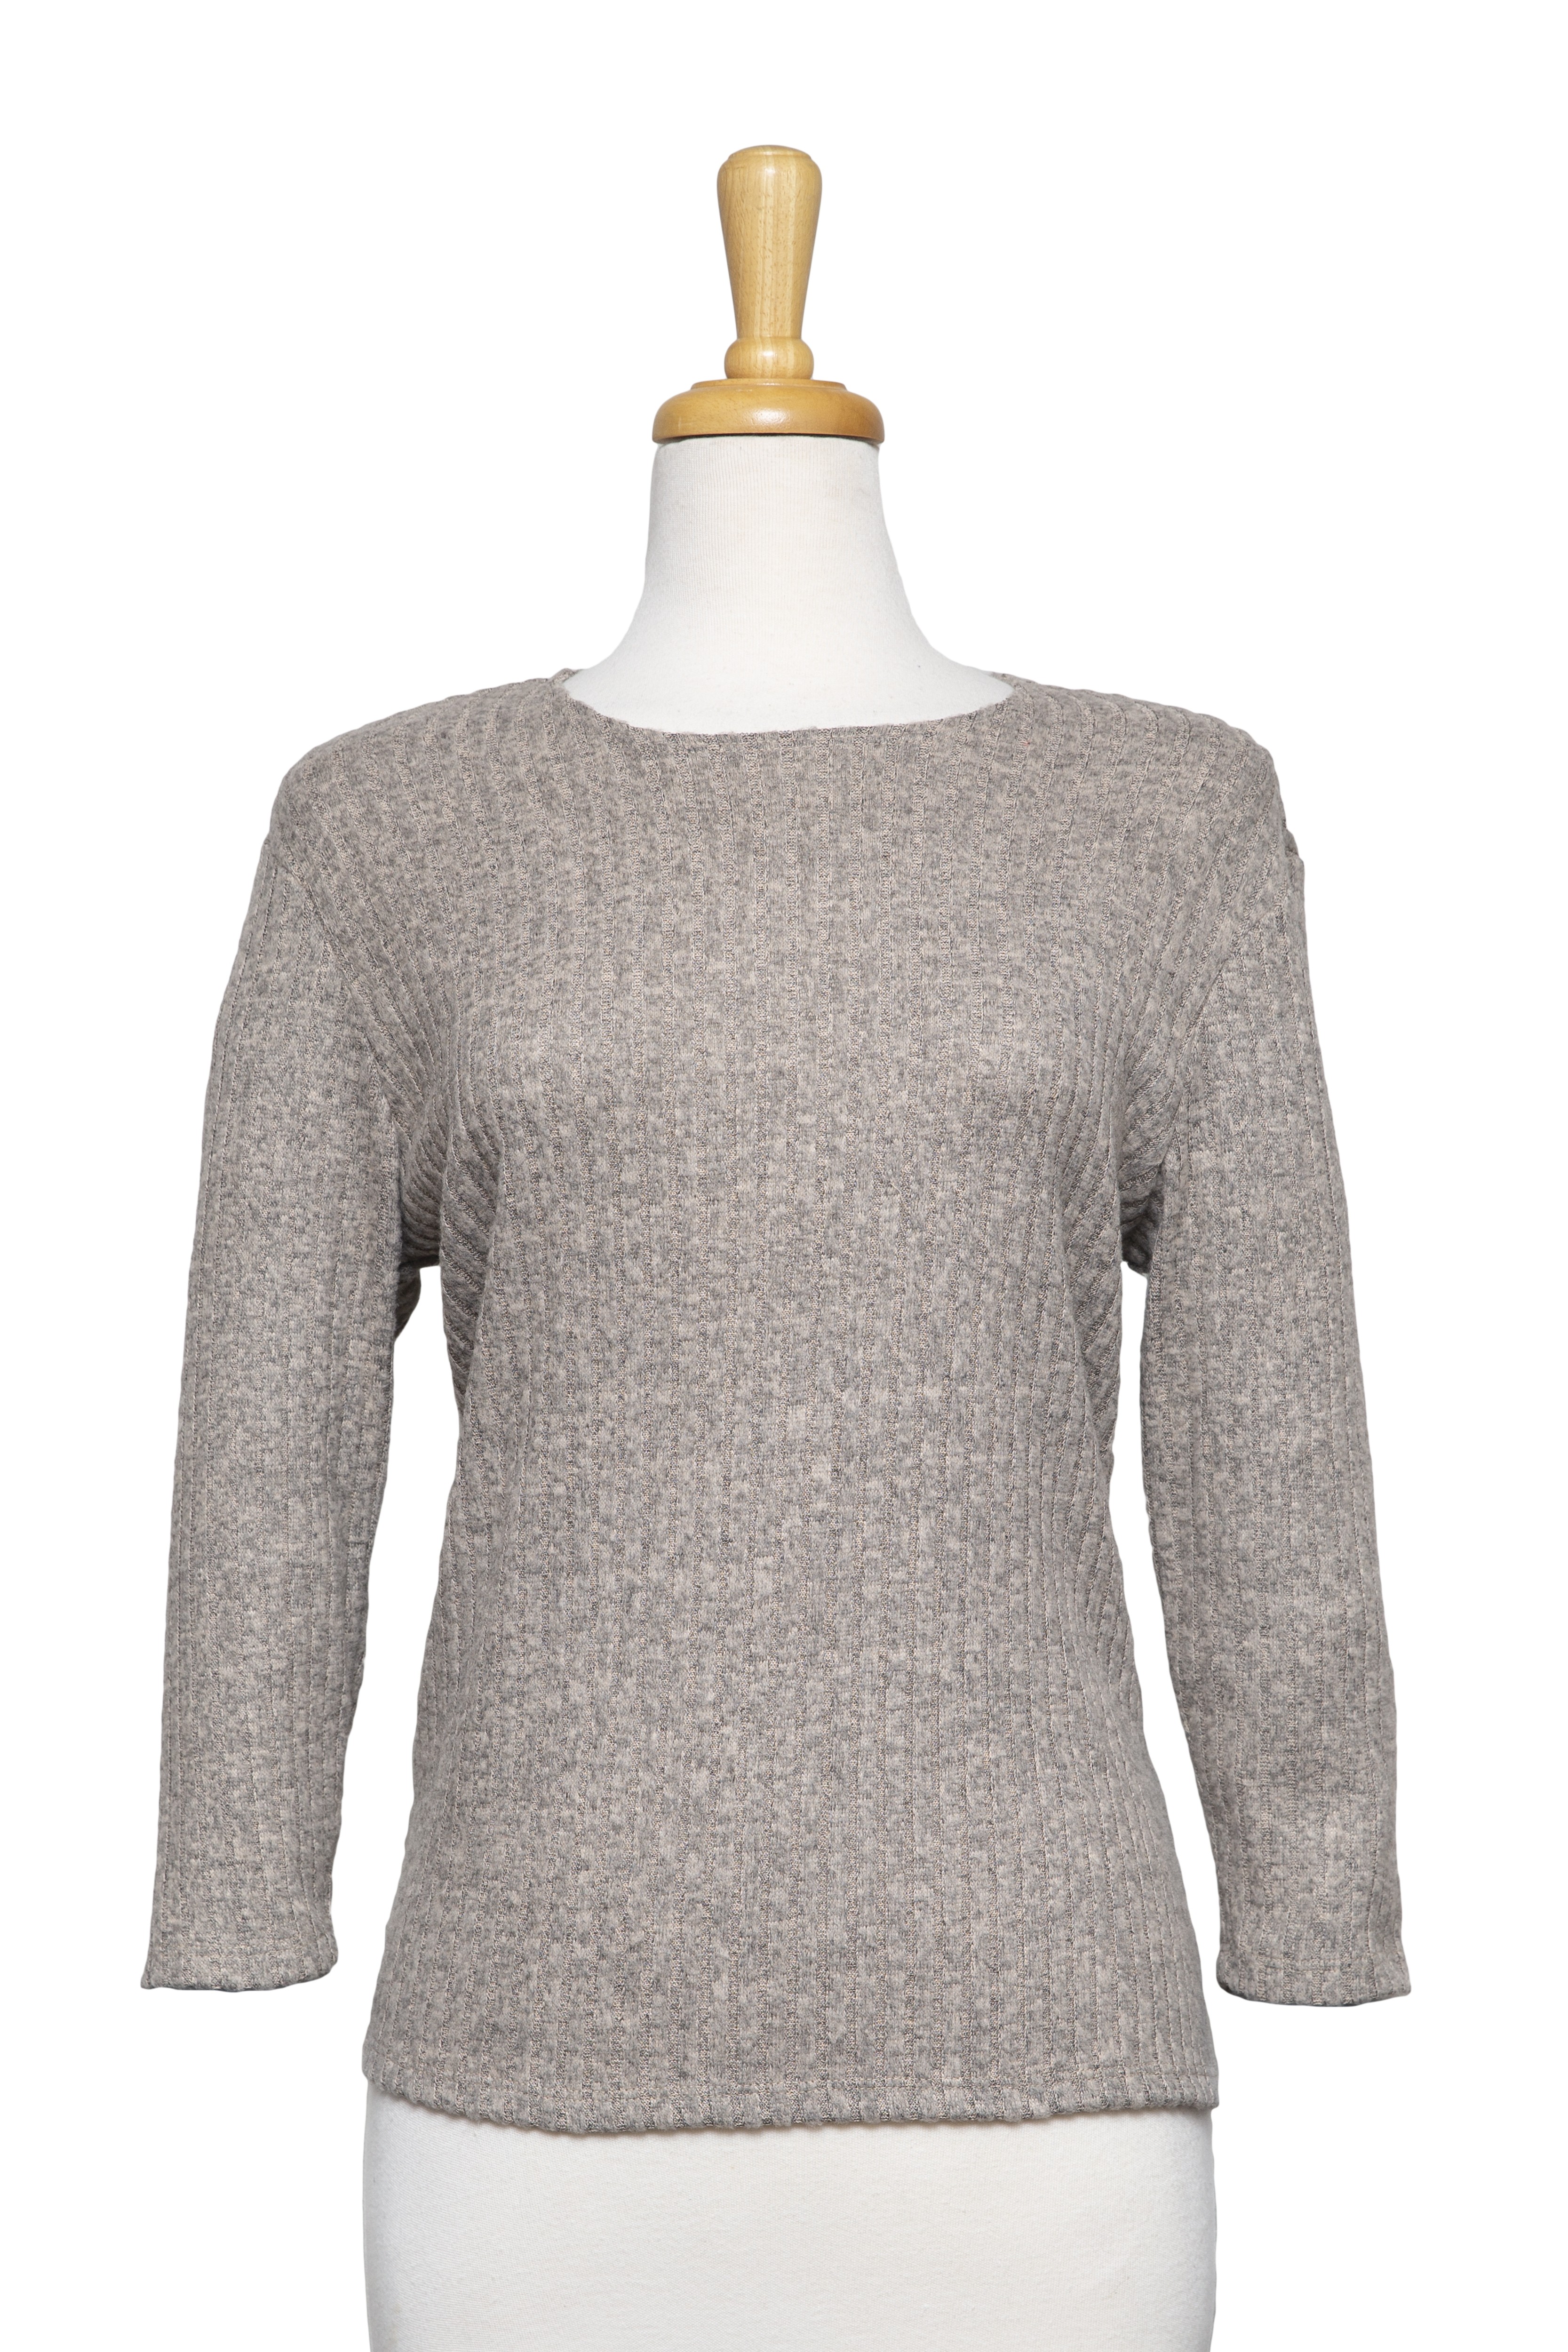 Plus Size Heather Tan Ribbed 3/4 Sleeves Knit Top